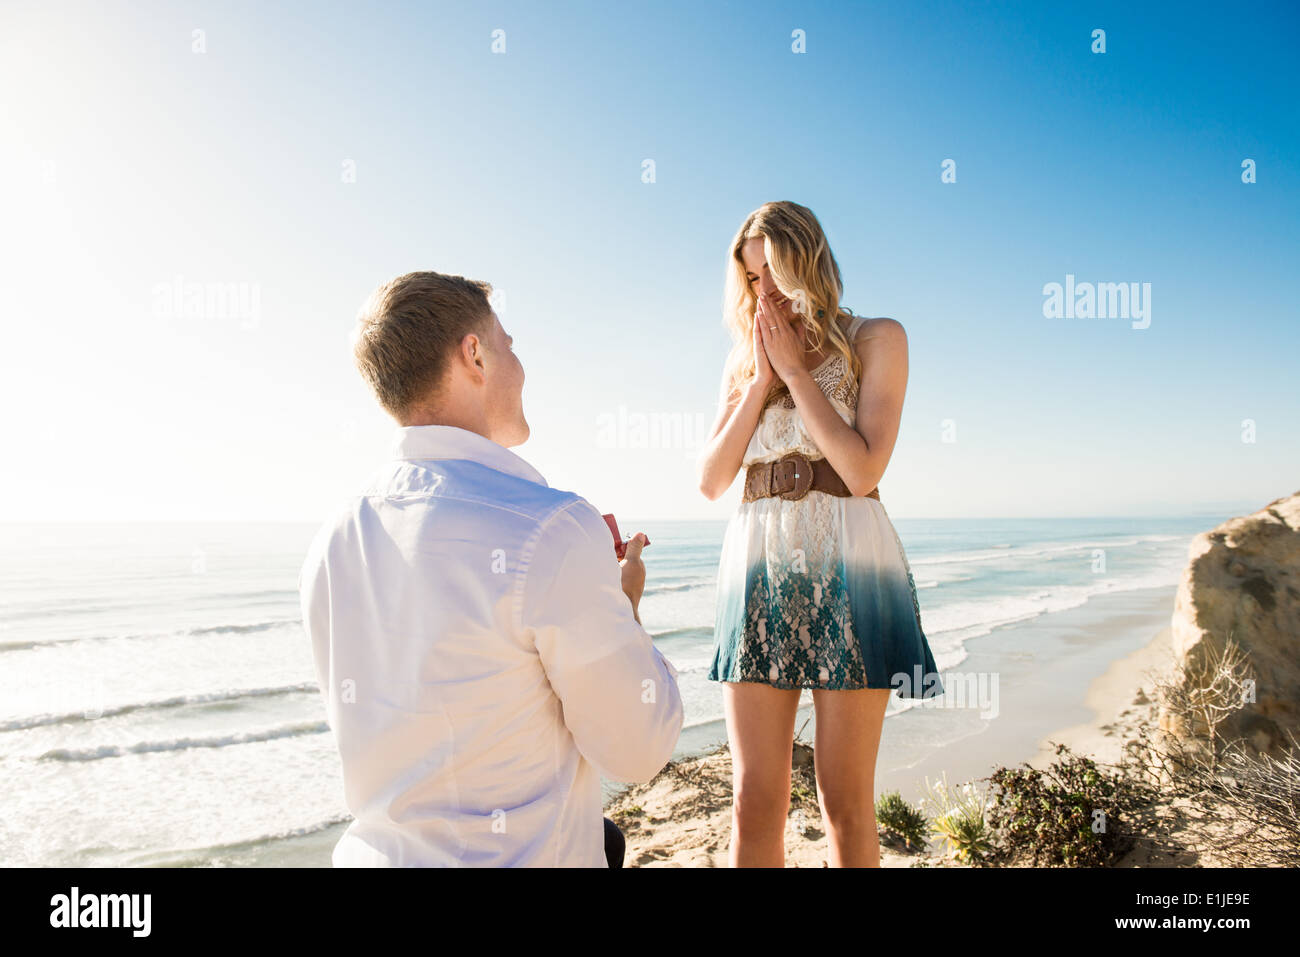 Young man proposing to girlfriend by sea, Torrey Pines, San Diego, California, USA Stock Photo